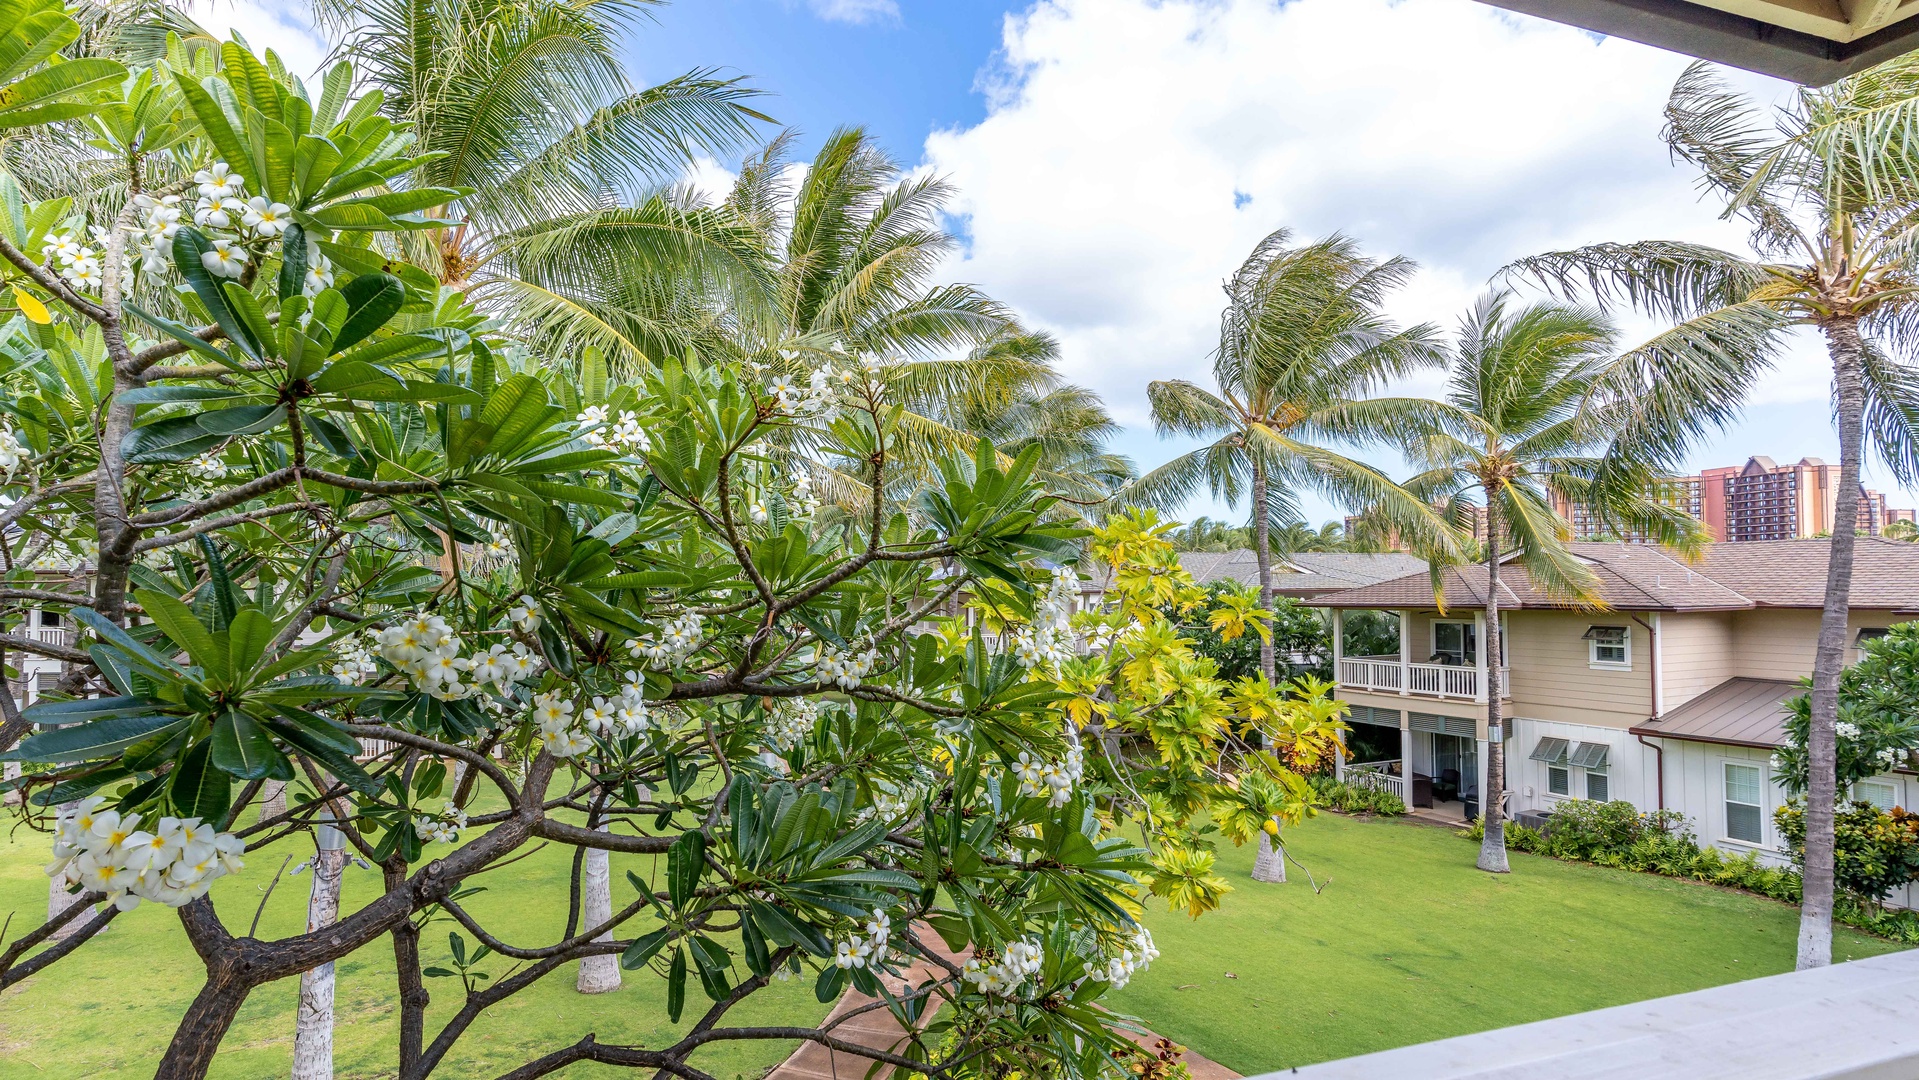 Kapolei Vacation Rentals, Coconut Plantation 1136-4 - The panoramic scenery from the upstairs lanai.